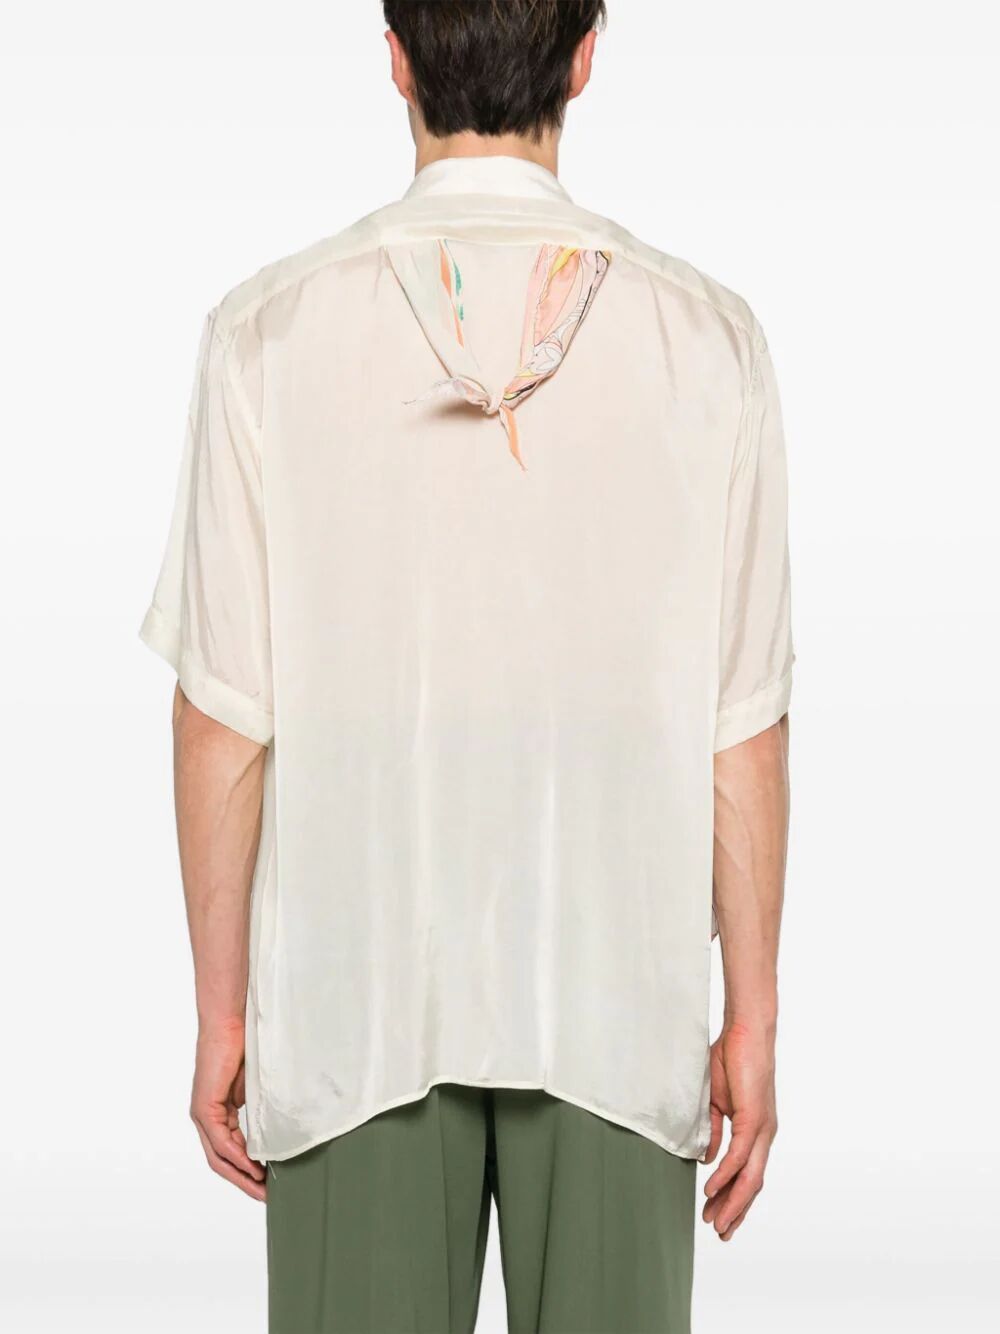 Shop Magliano Pareon Surplus Shirt - Pattern May Change Dpending On The Size In White